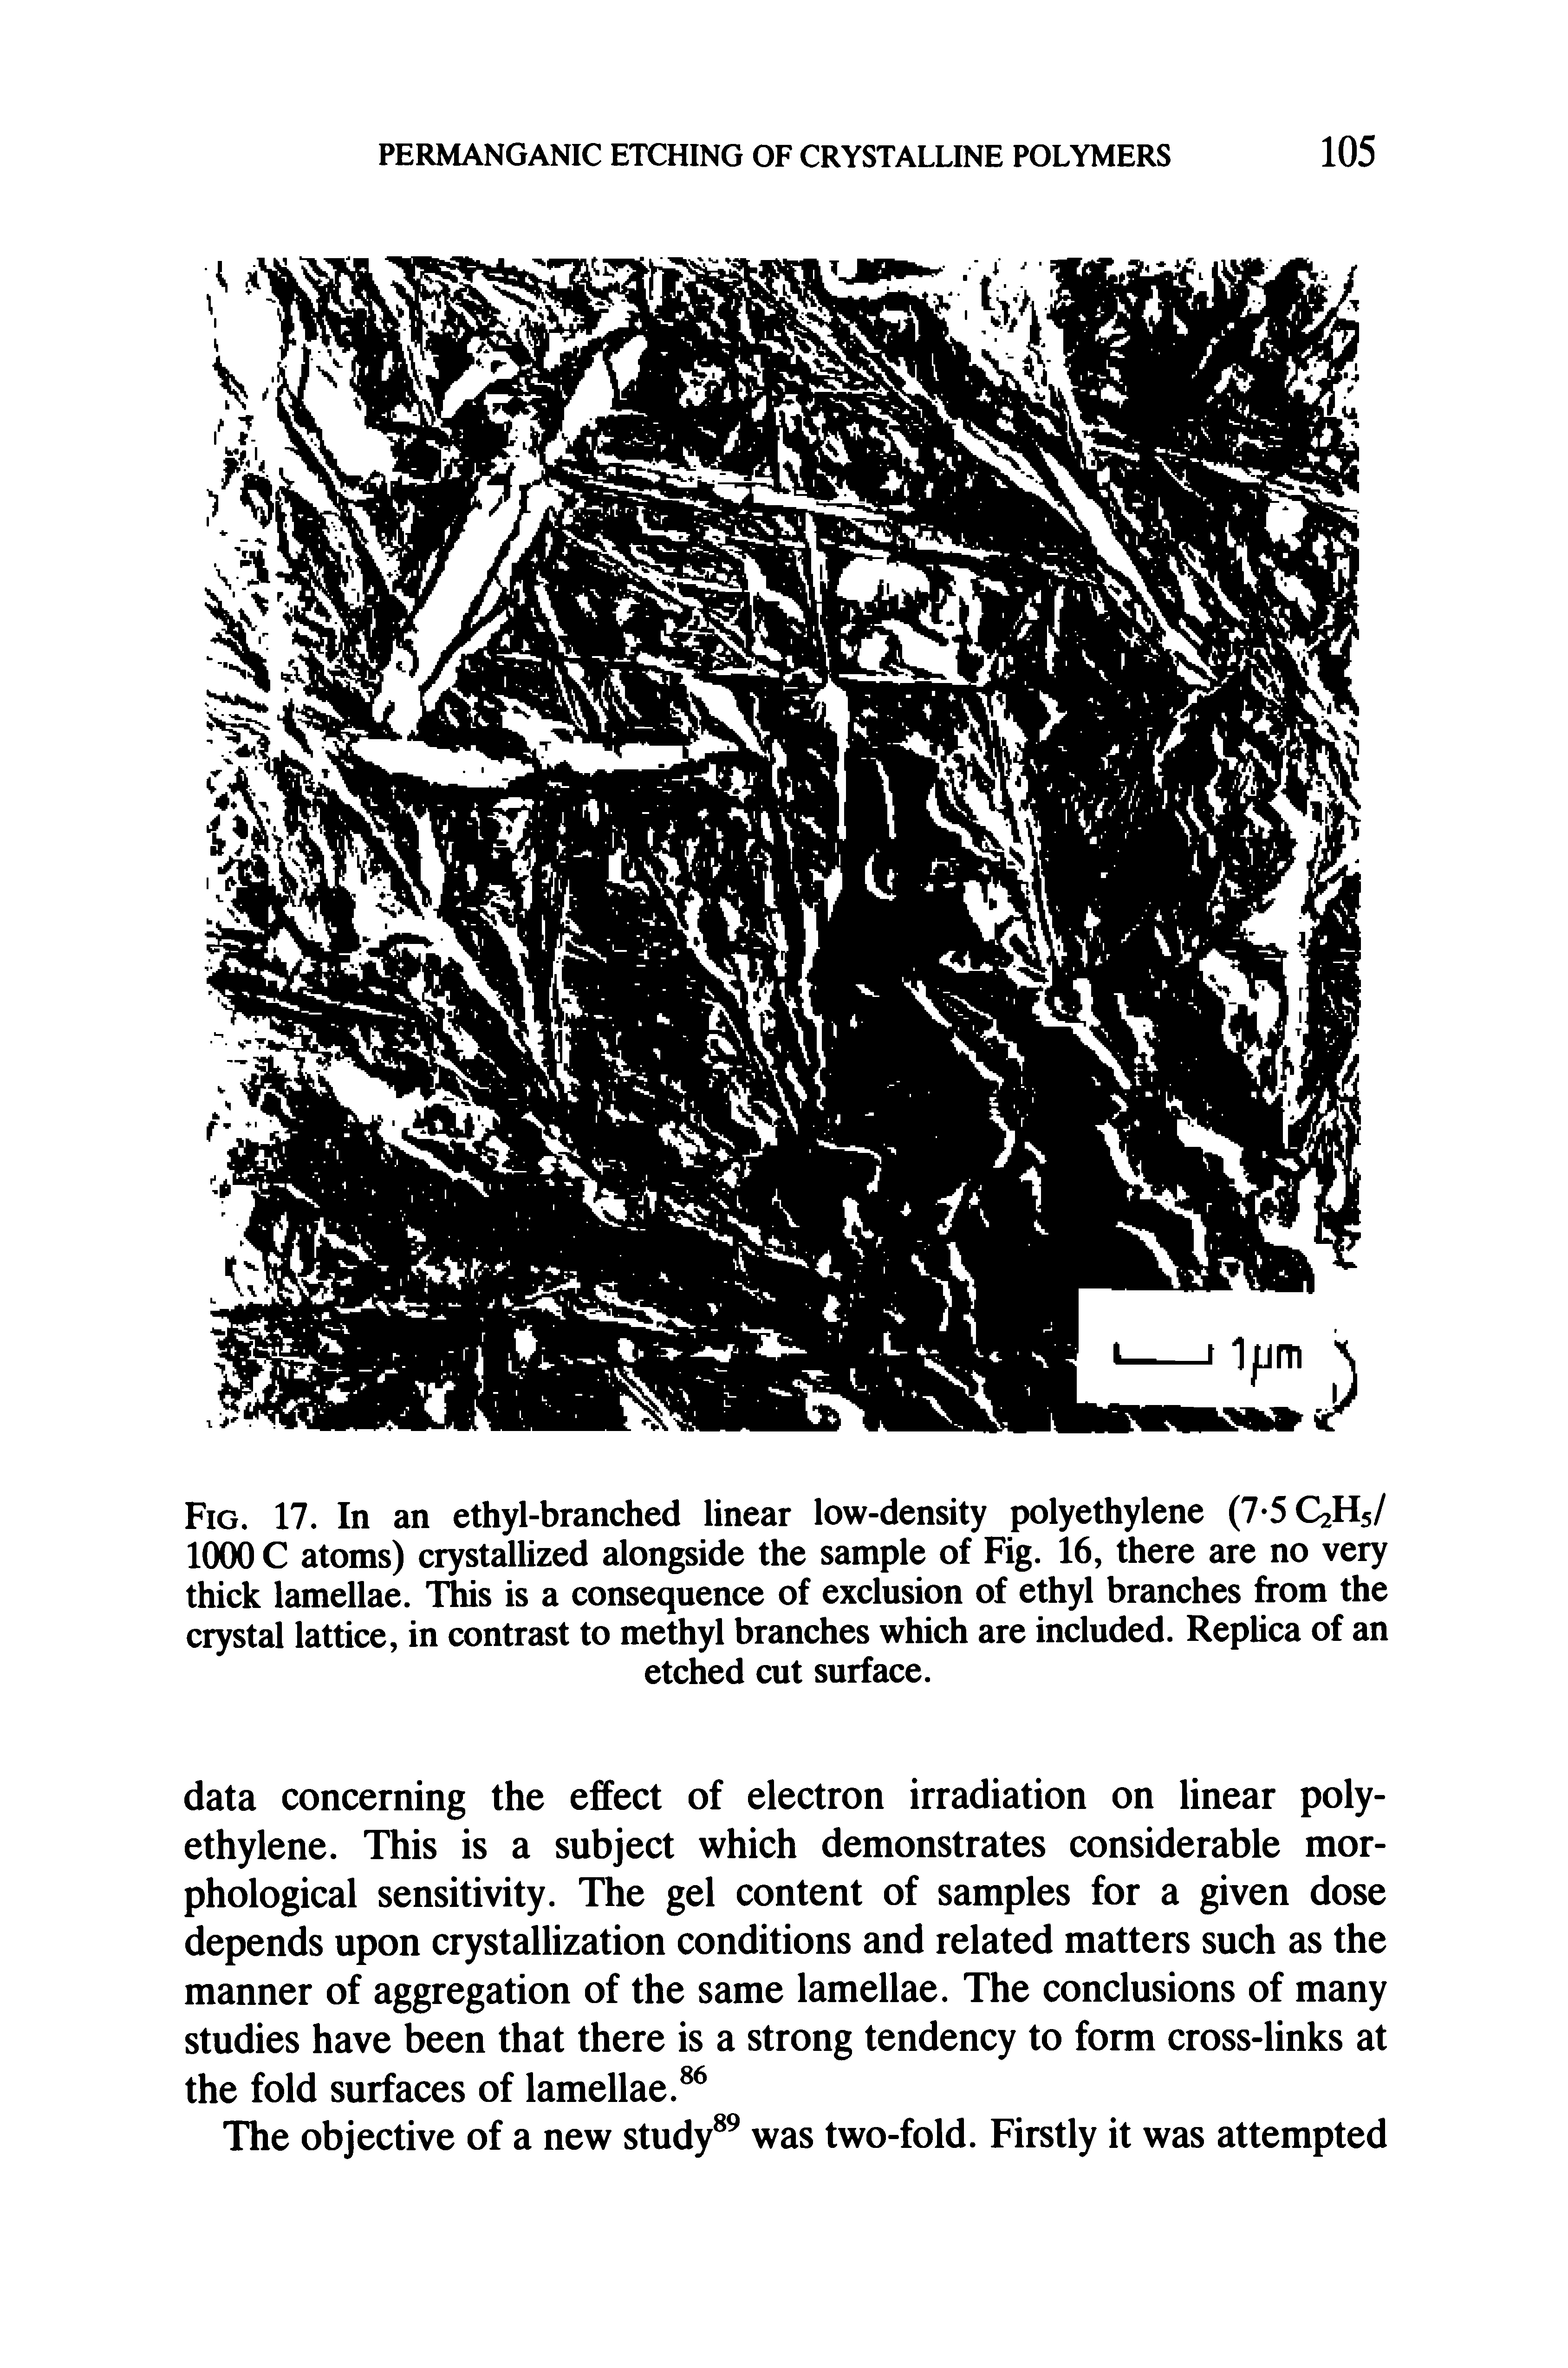 Fig. 17. In an ethyl-branched linear low-density polyethylene (7-5 QHs/ 1000 C atoms) crystallized alongside the sample of Fig. 16, there are no very thick lamellae. This is a consequence of exclusion of ethyl branches from the crystal lattice, in contrast to methyl branches which are included. Replica of an...